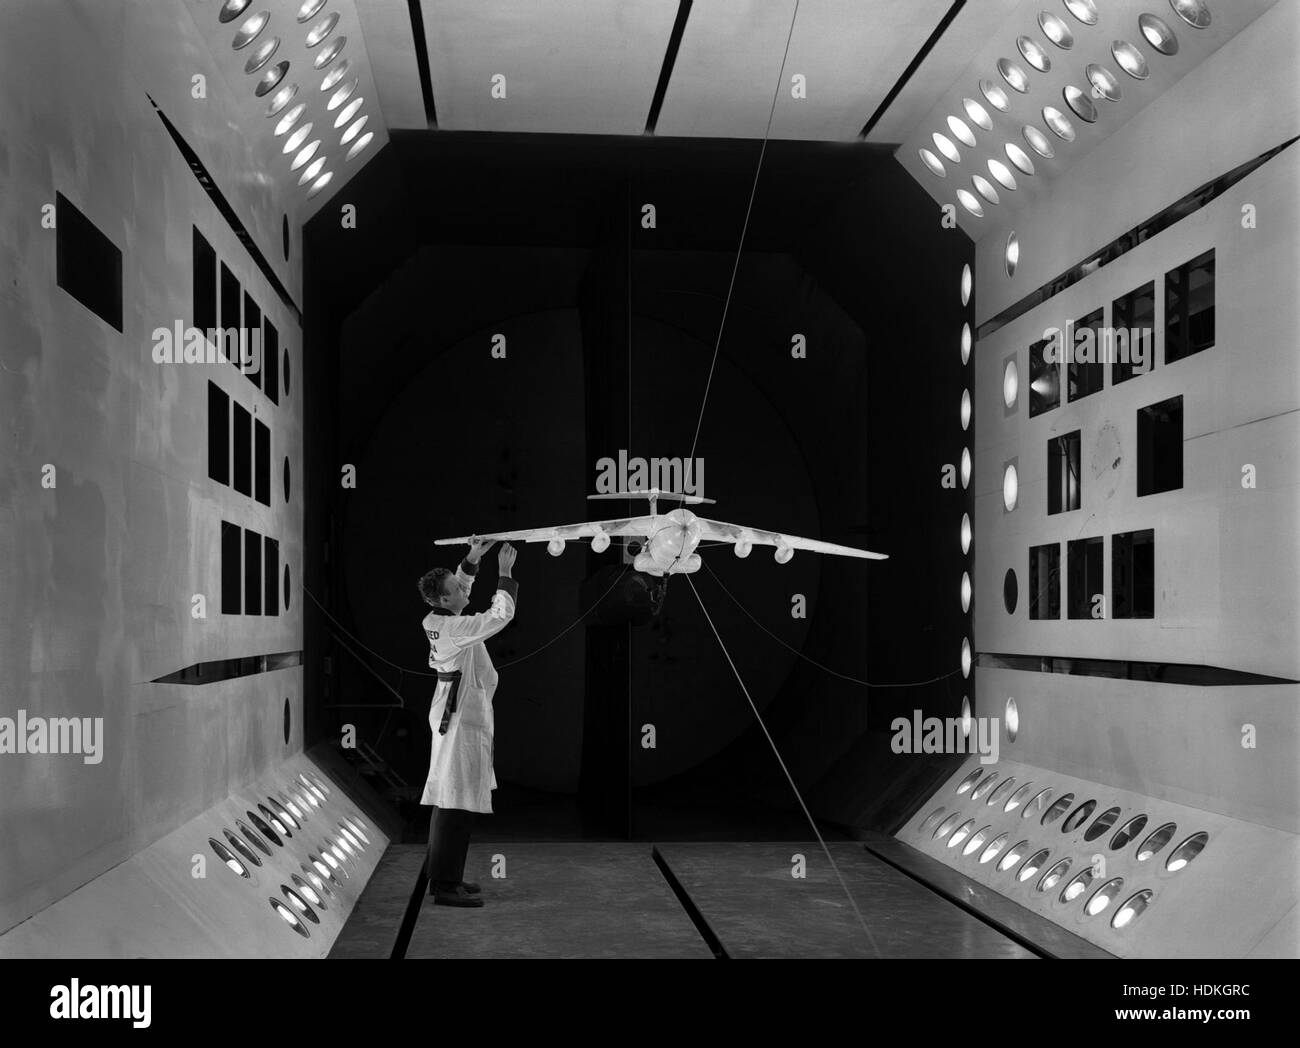 A National Advisory Committee on Aeronautics (NACA) scientist performs dynamic tests on a model support system of the Lockheed C-141 strategic airlifter aircraft at the Langley Research Center Transonic Dynamics Tunnel November 16, 1962 in Hampton, Virginia. Stock Photo